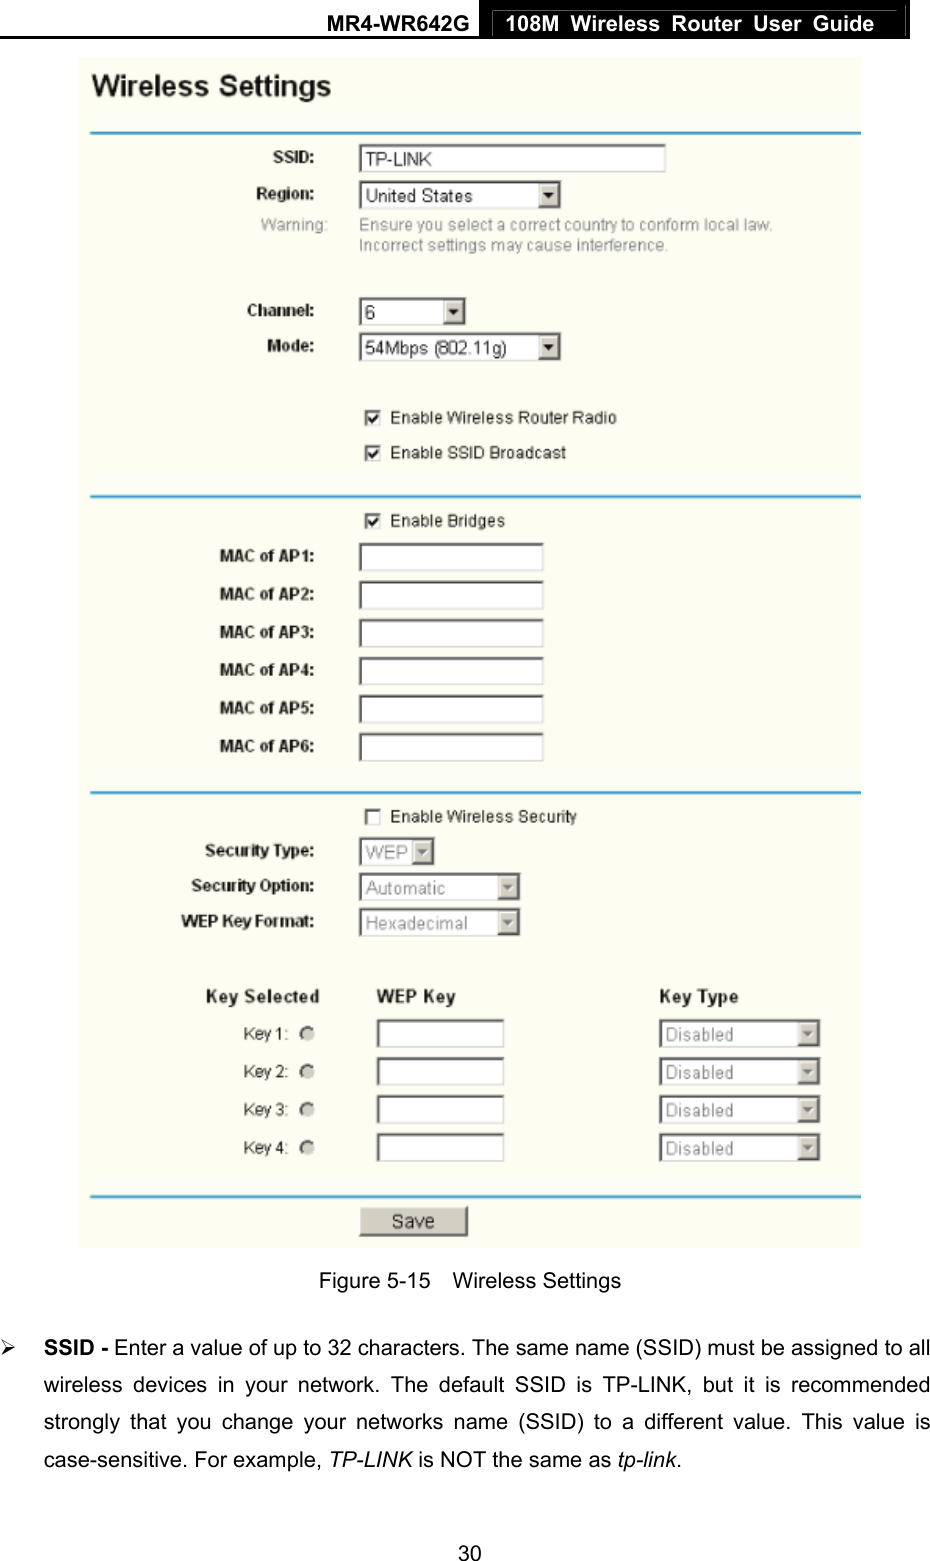 MR4-WR642G 108M Wireless Router User Guide   30 Figure 5-15  Wireless Settings ¾ SSID - Enter a value of up to 32 characters. The same name (SSID) must be assigned to all wireless devices in your network. The default SSID is TP-LINK, but it is recommended strongly that you change your networks name (SSID) to a different value. This value is case-sensitive. For example, TP-LINK is NOT the same as tp-link. 